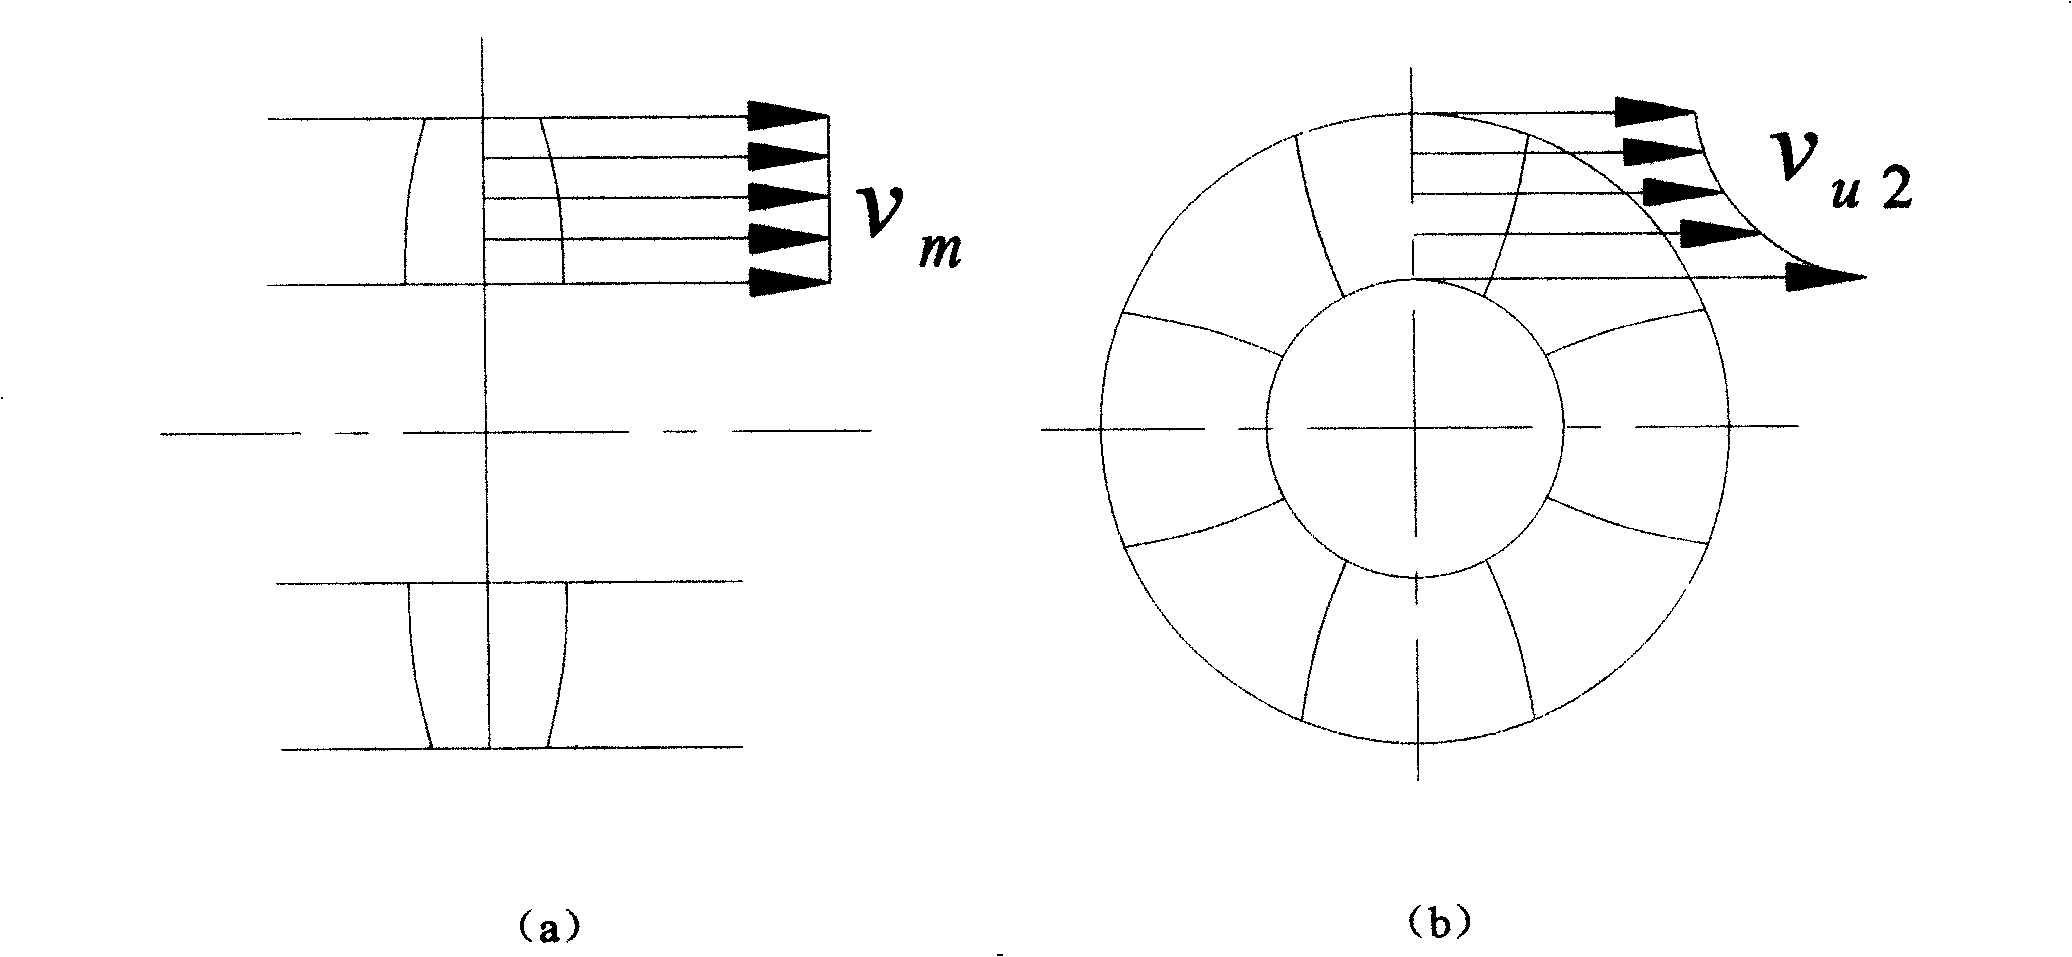 Axial flow impeller machine design method and blade